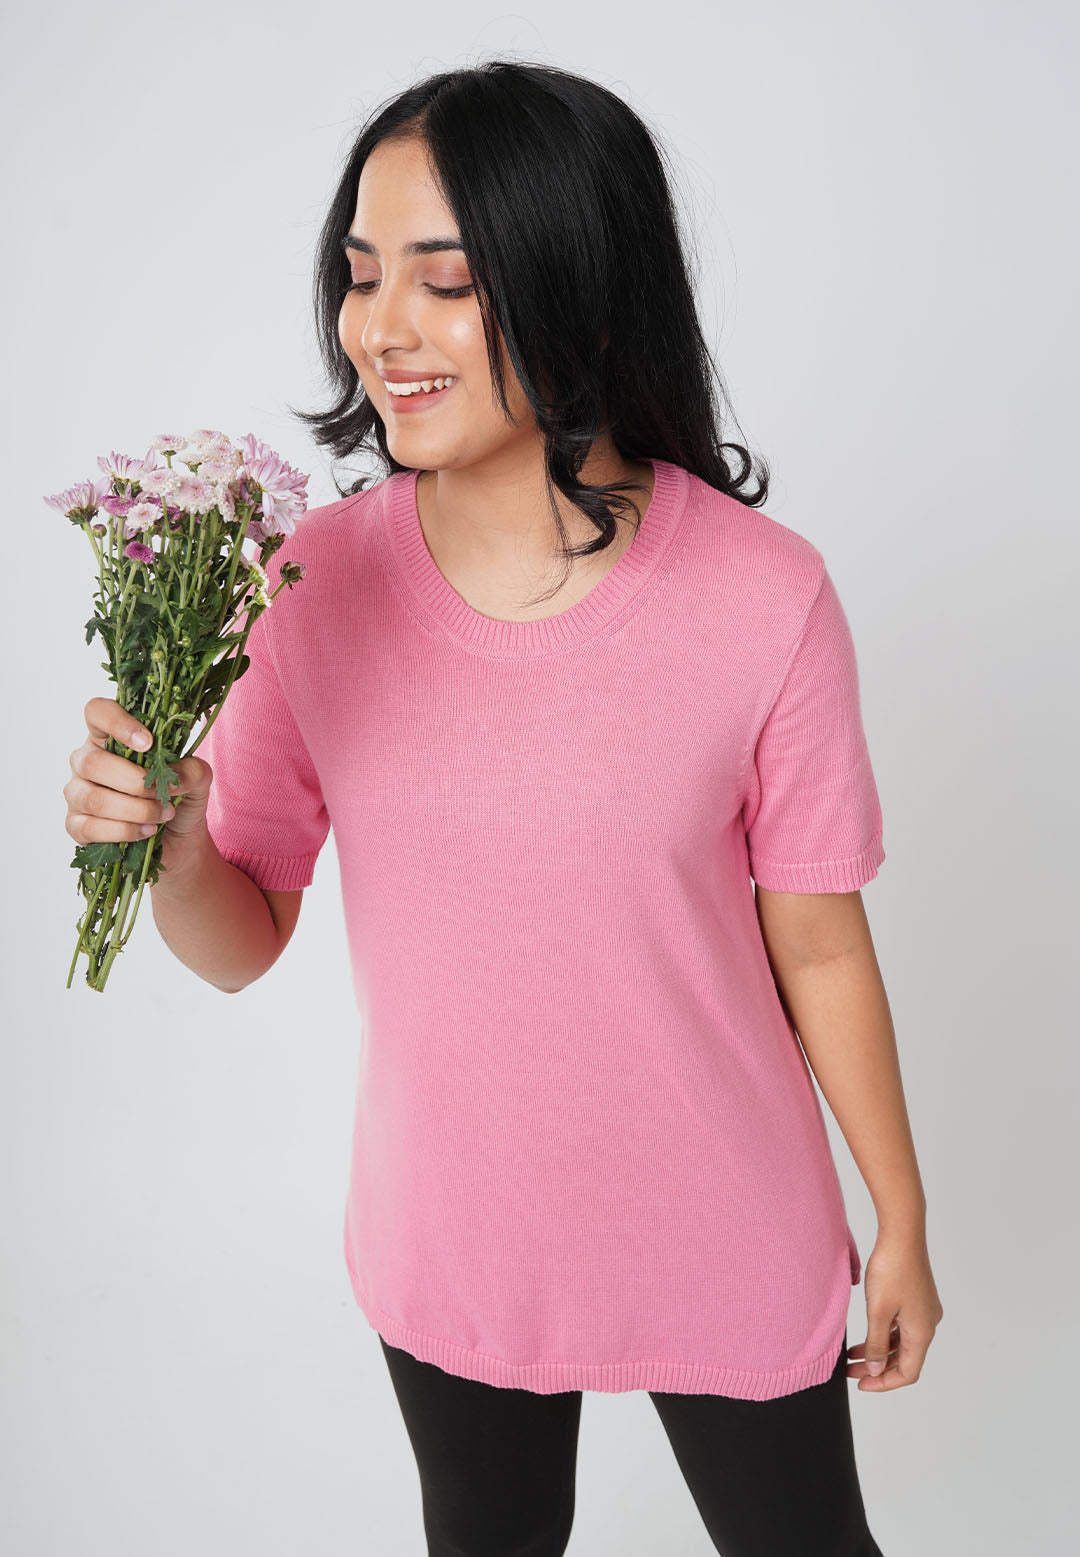 Pink Tops For Women